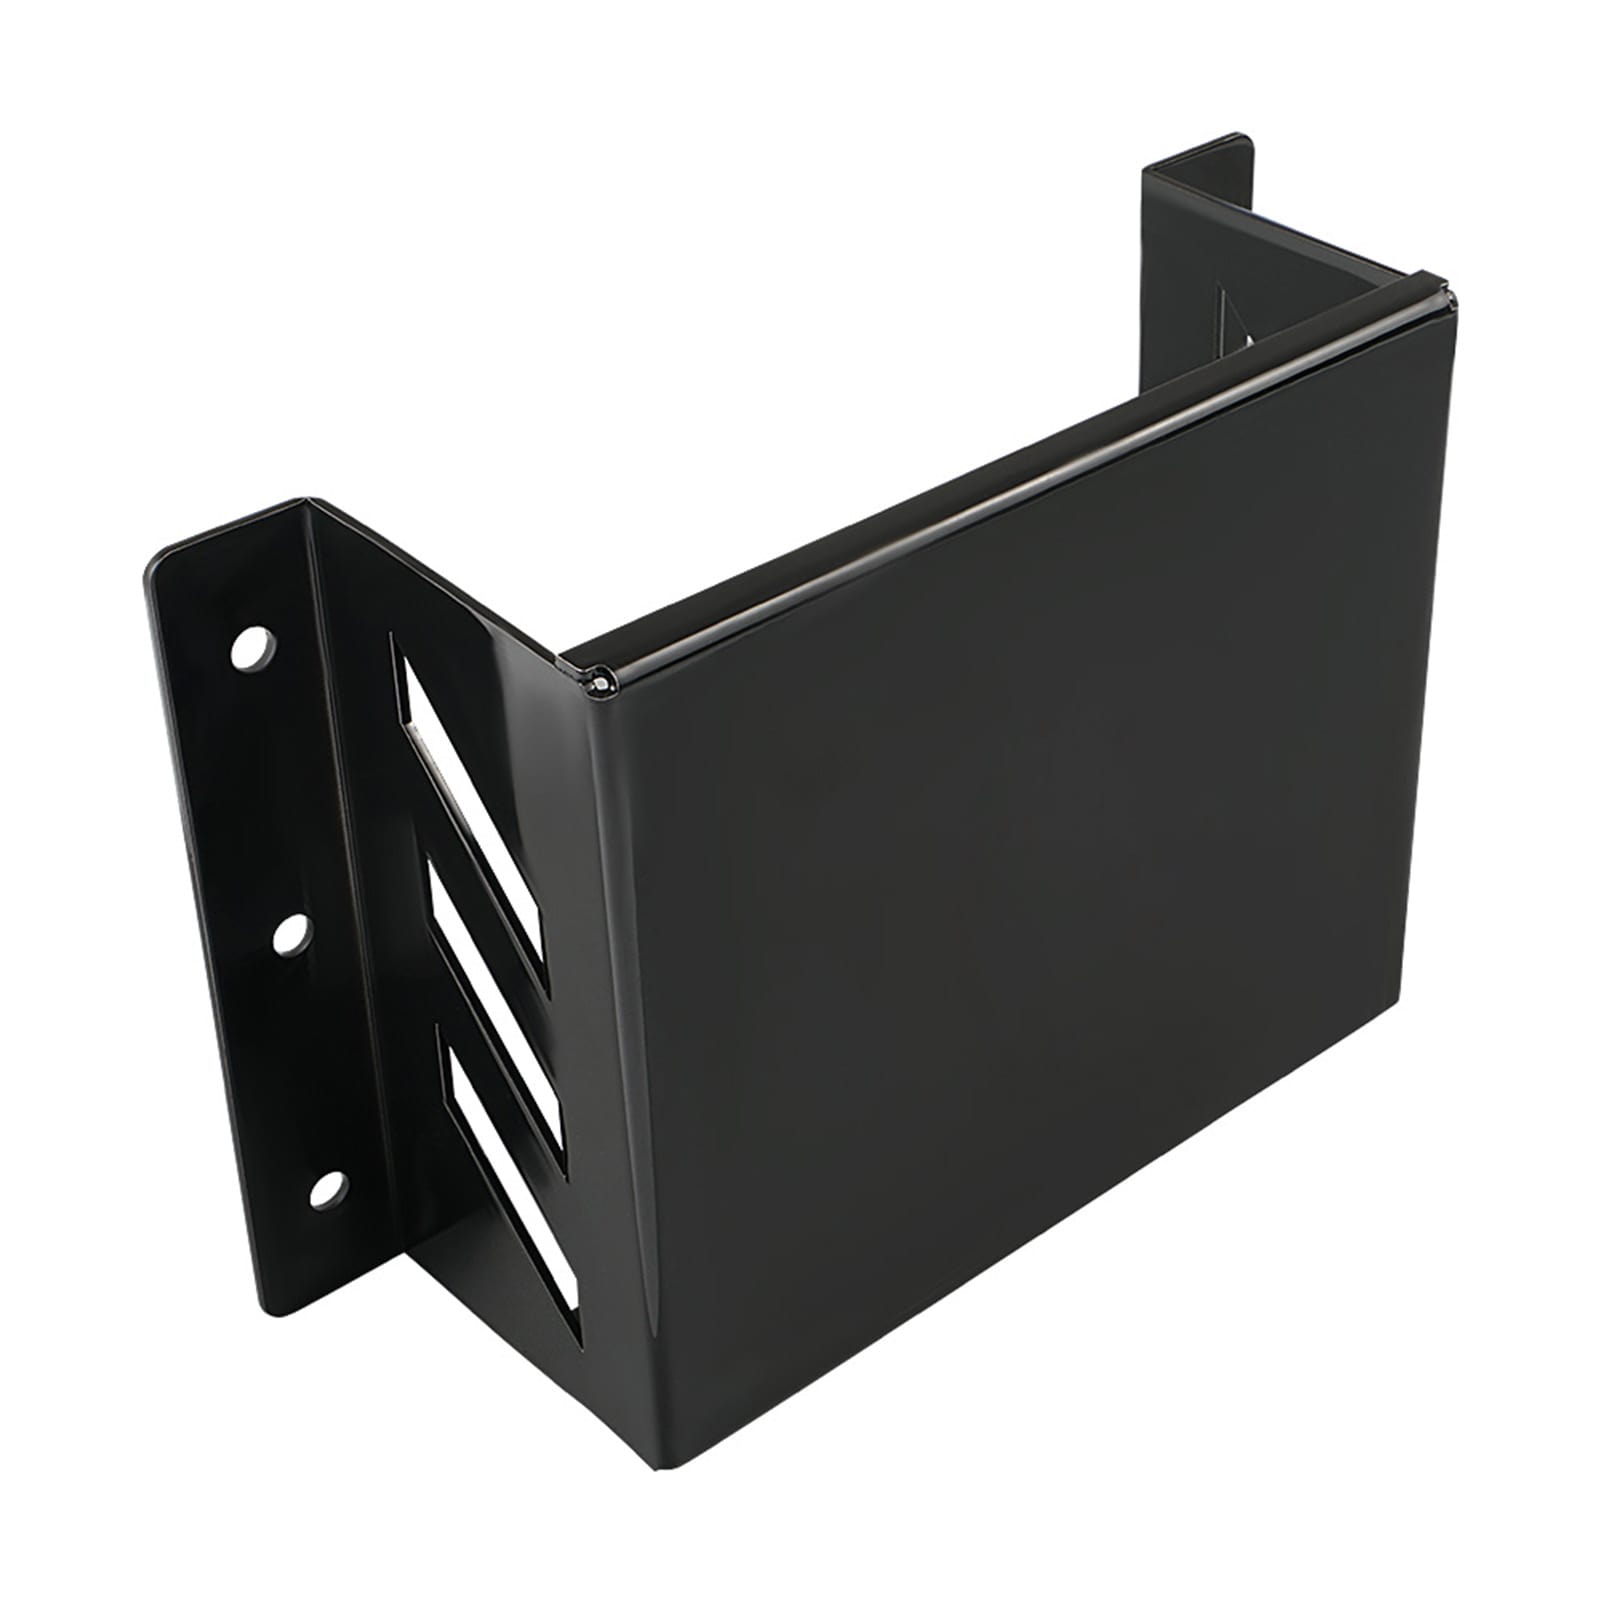 For PC680 Odyssey Battery Box Mount Mounting Bracket